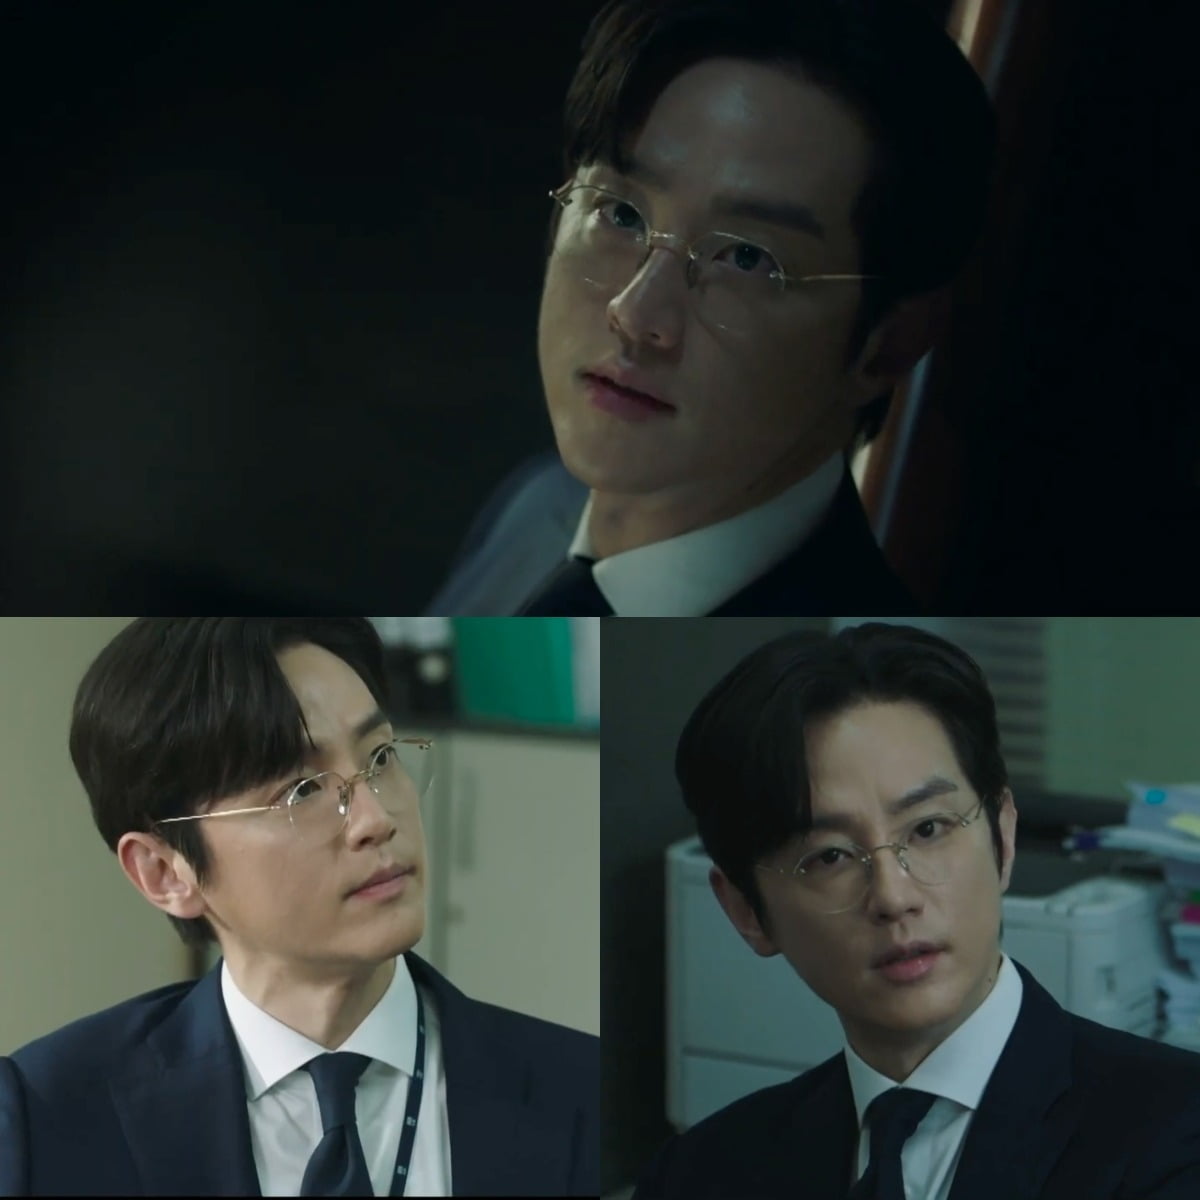 Actor Kwon Yul transforms into an ace aristocratic prosecutor